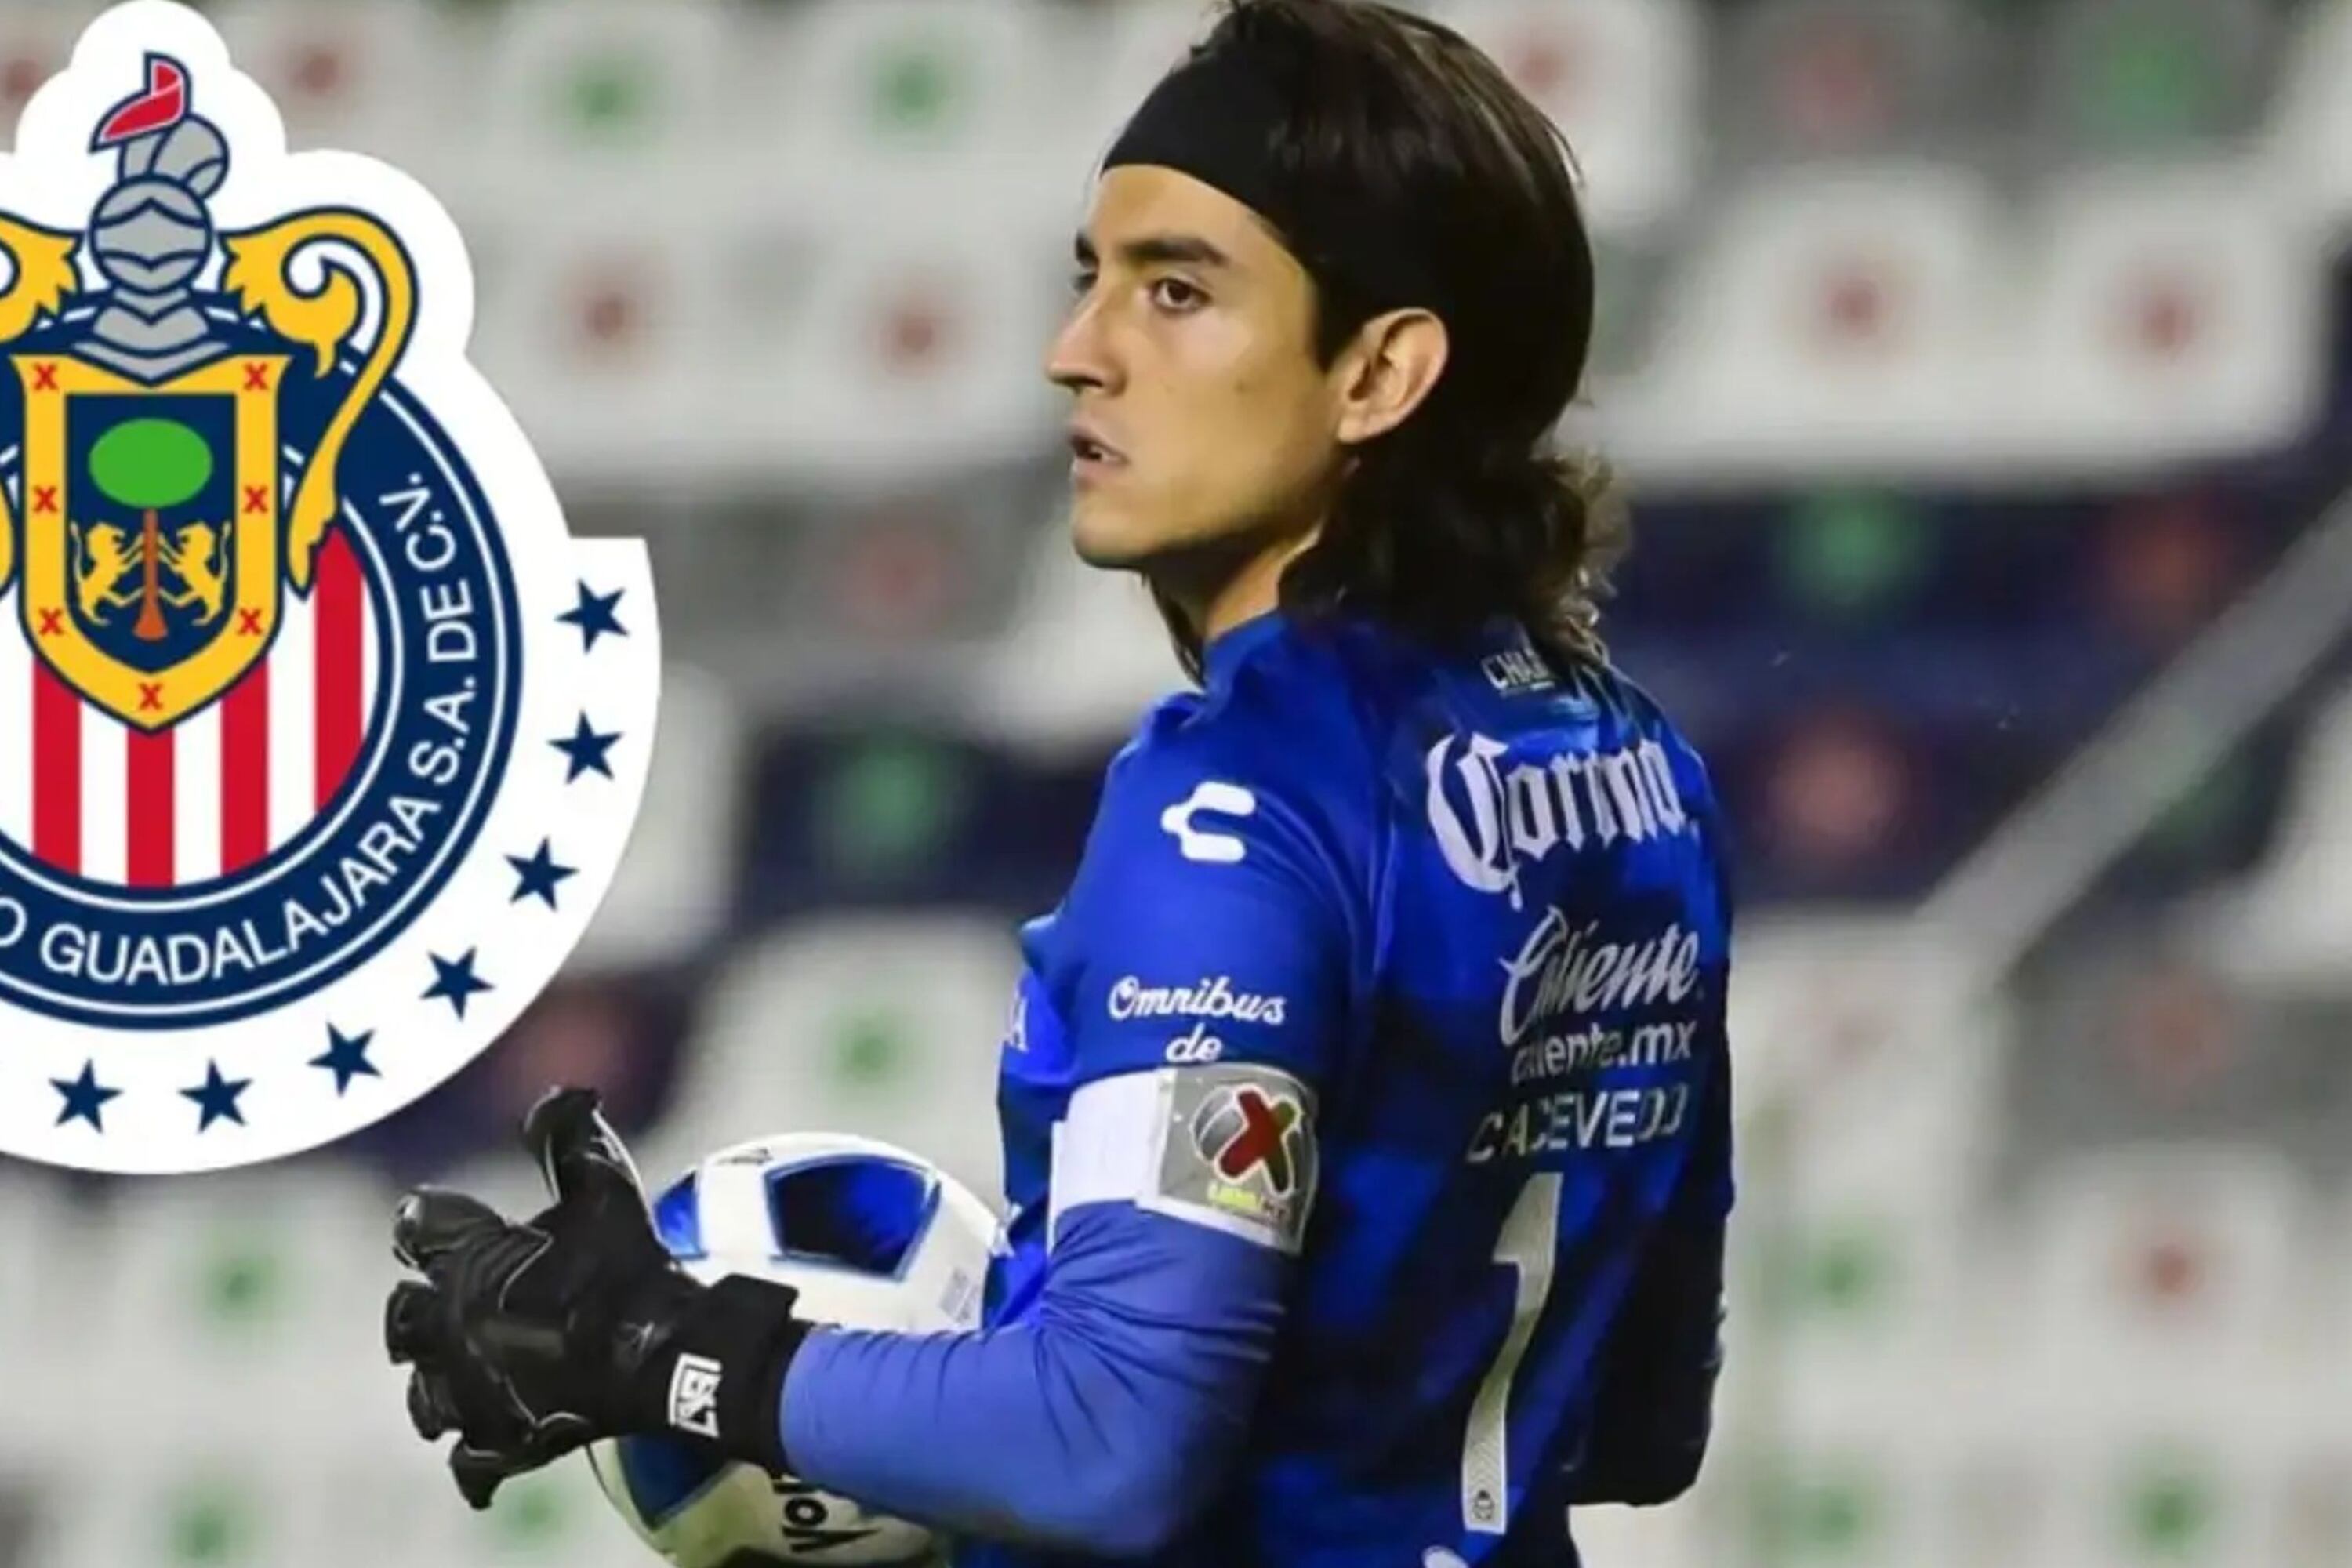 Chivas has no money for Acevedo and now they are looking for this goalkeeper